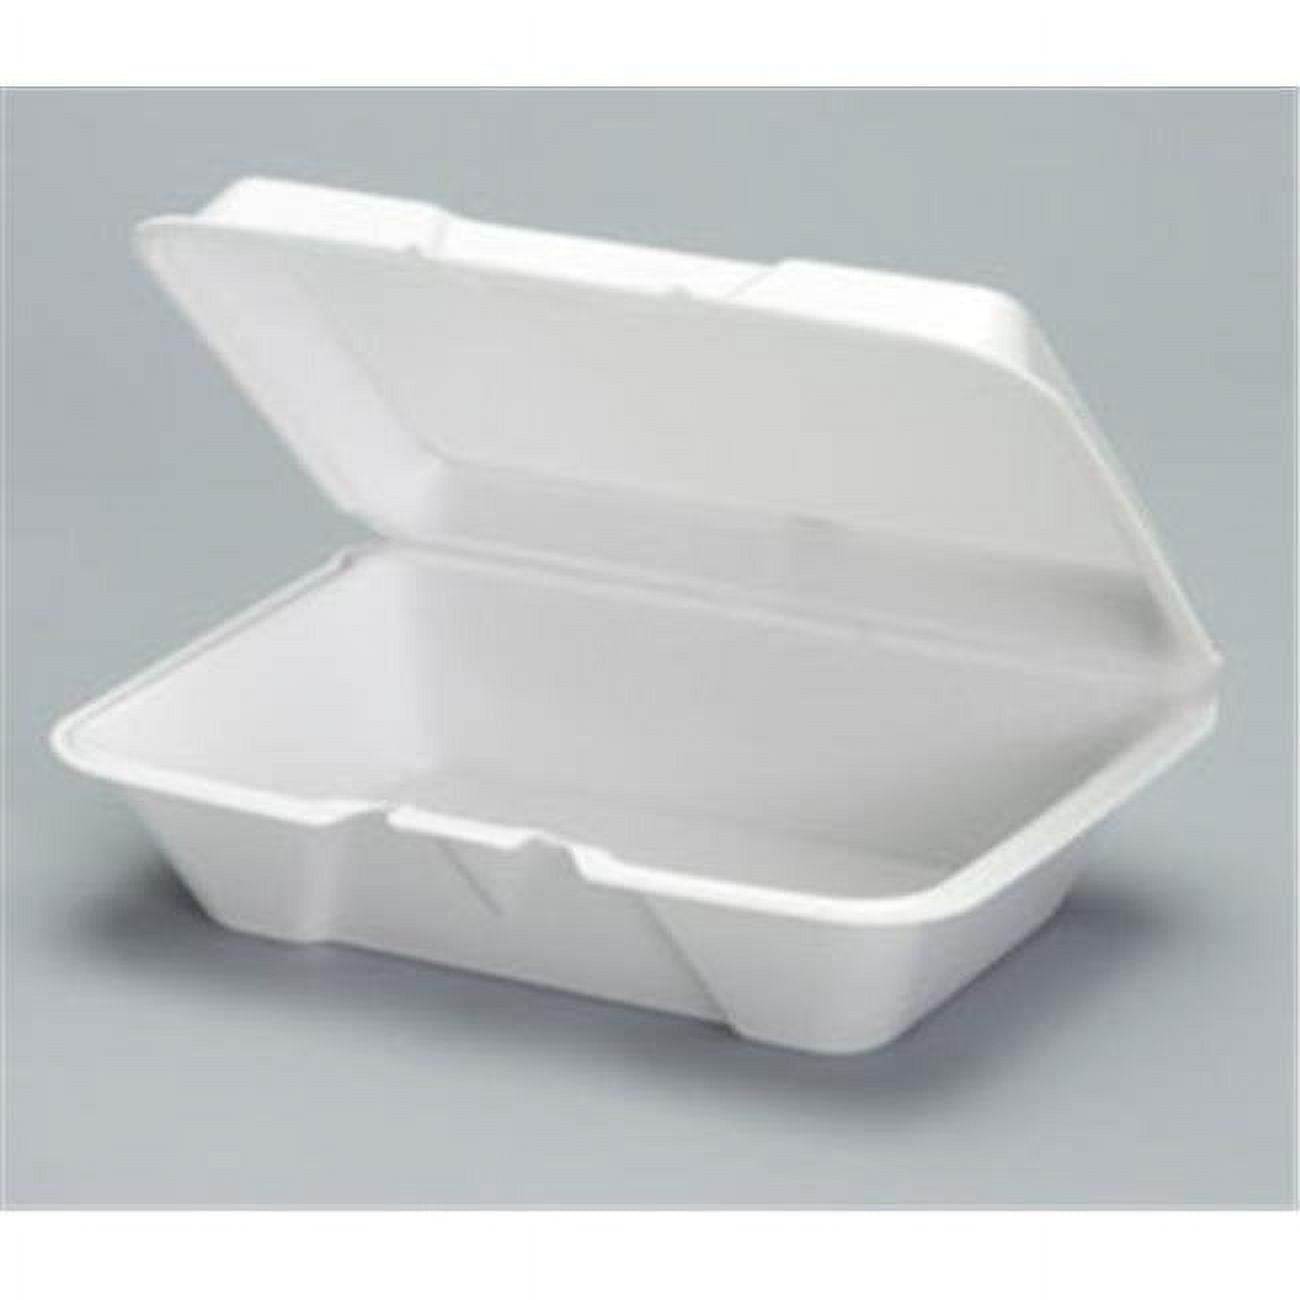 20500 Cpc Large Deep All Purpose Foam Hinged Lid Container, White - Case Of 200